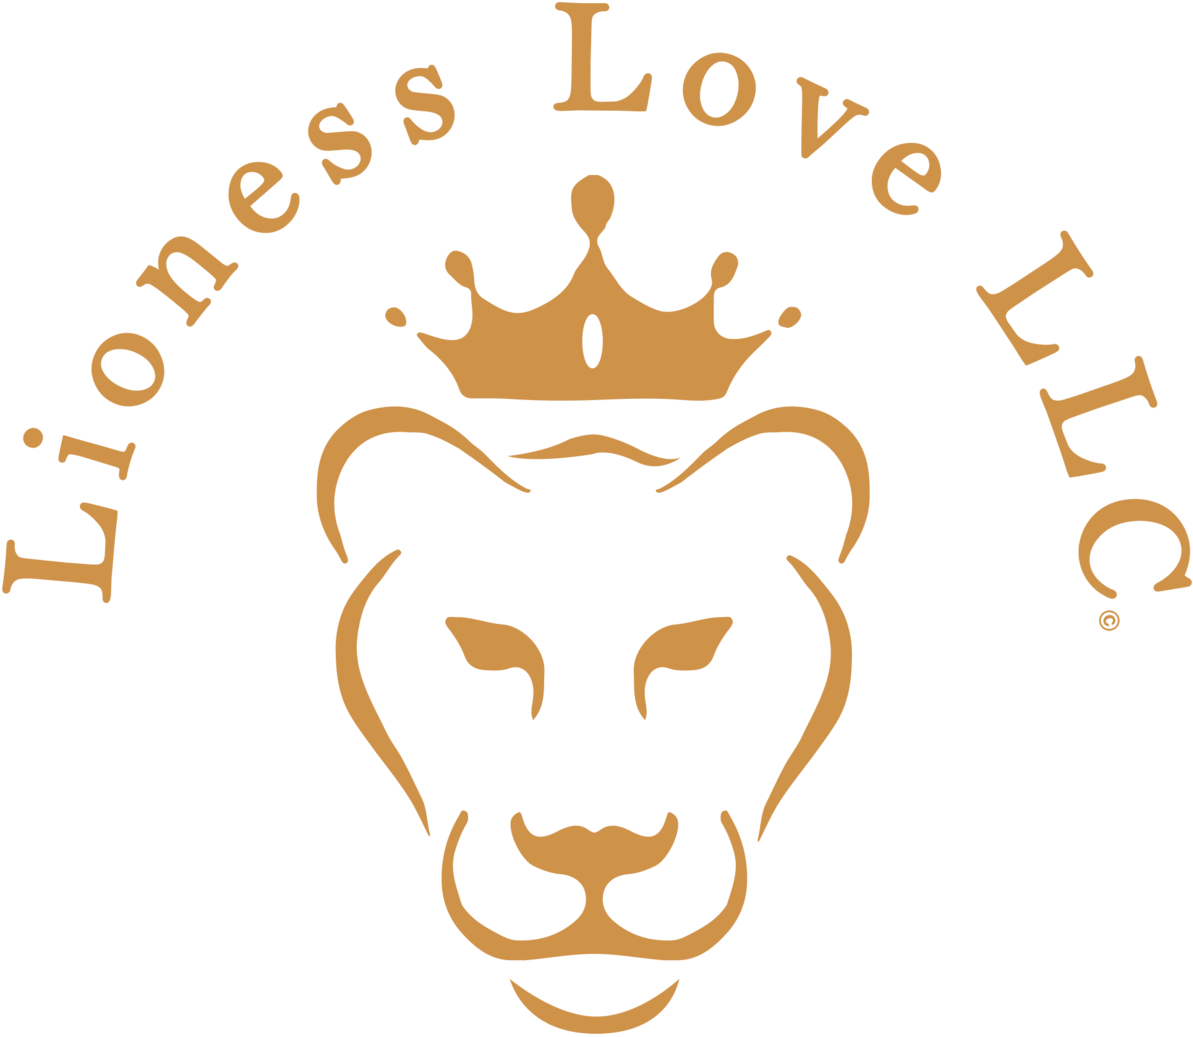 A Logo Of A Lion With A Crown